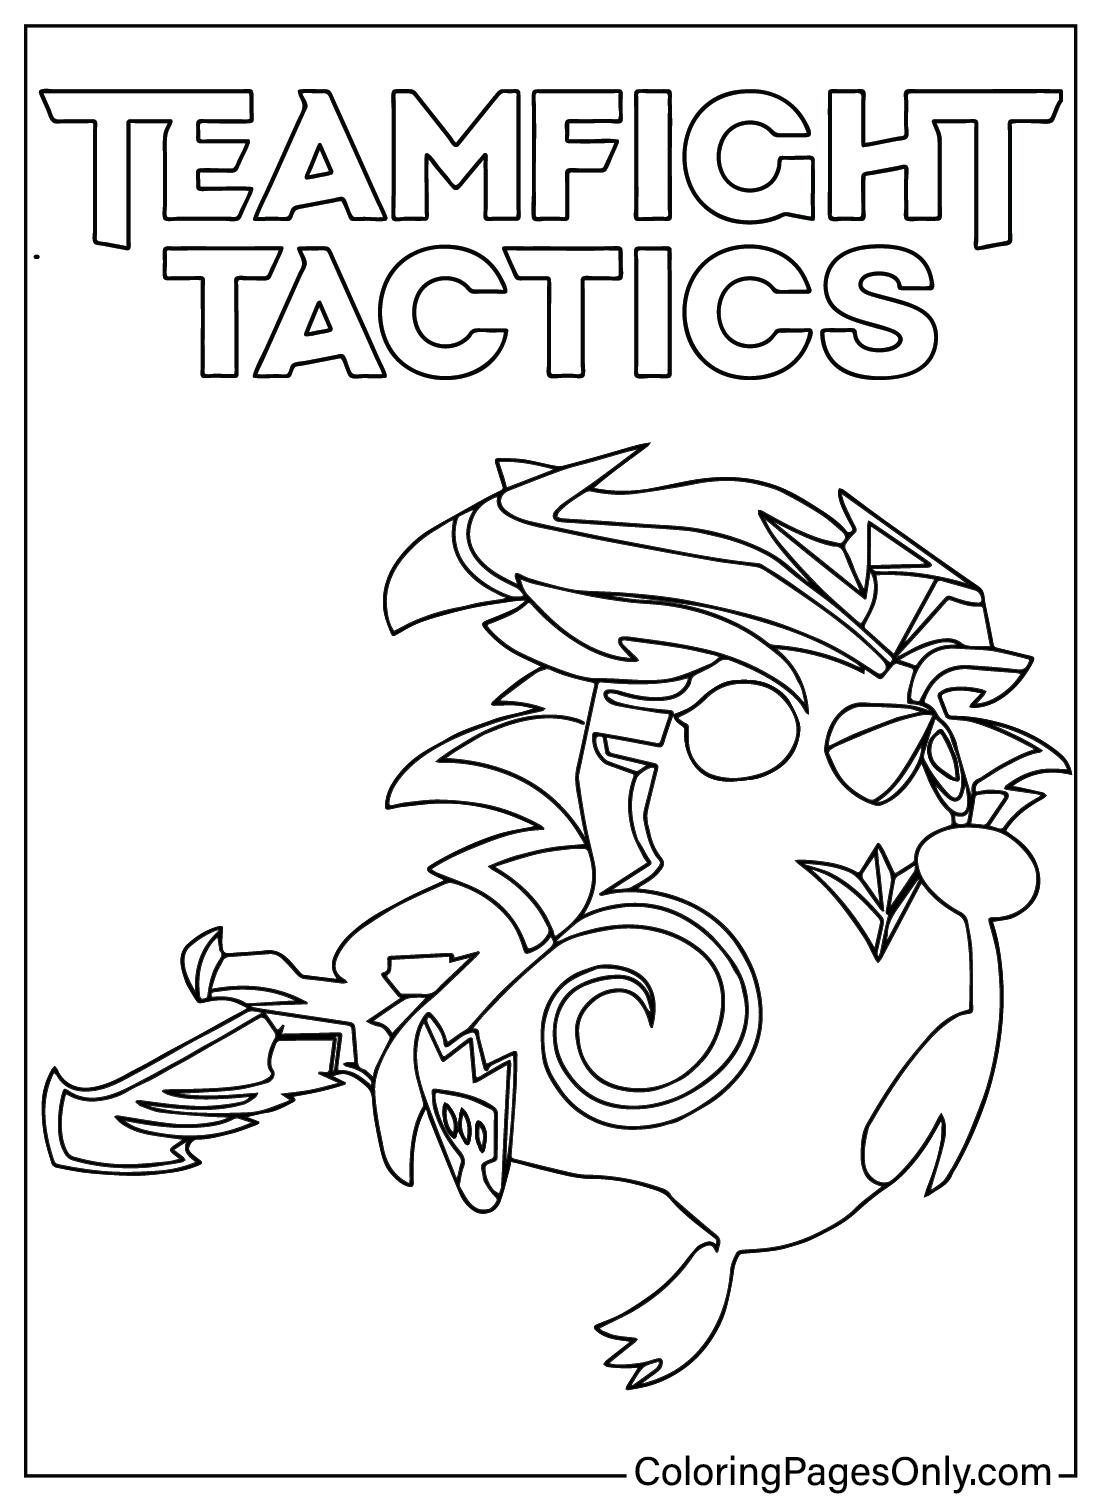 Nardo from Teamfight Tactics Coloring Page from Teamfight Tactics